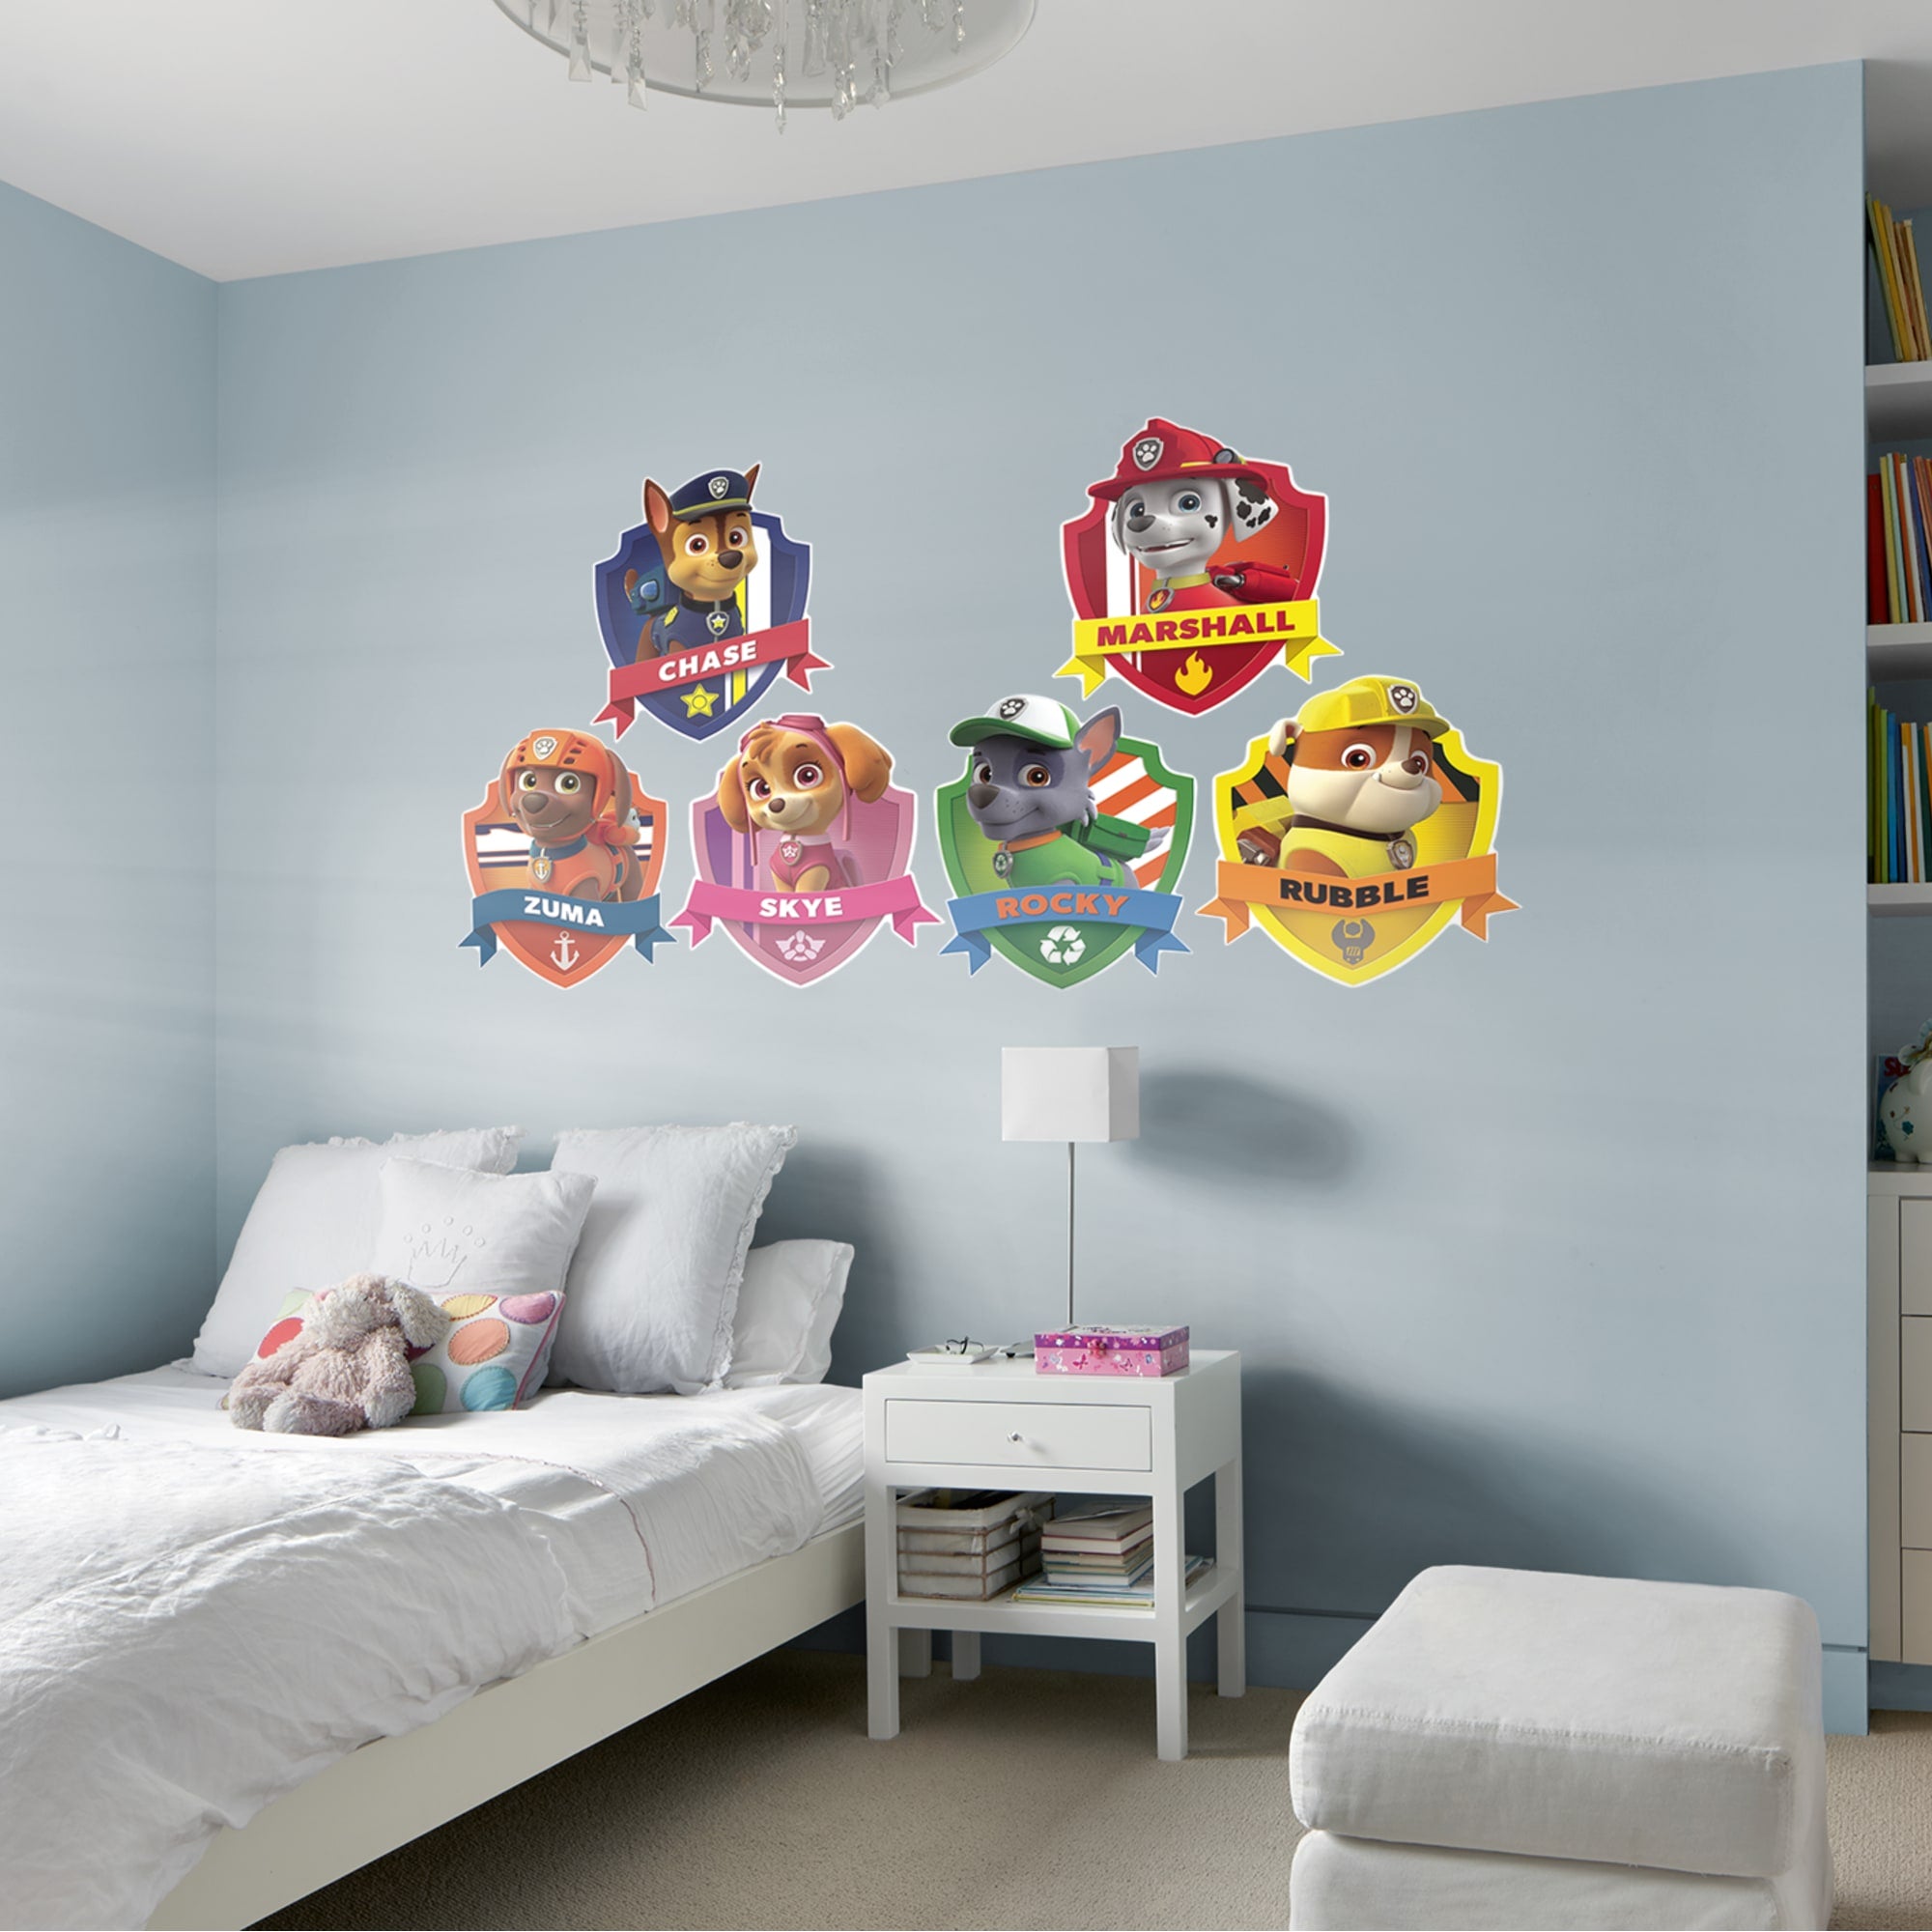 PAW Patrol: Shields Collection - Officially Licensed Removable Wall Decals 79.0"W x 52.0"H by Fathead | Vinyl